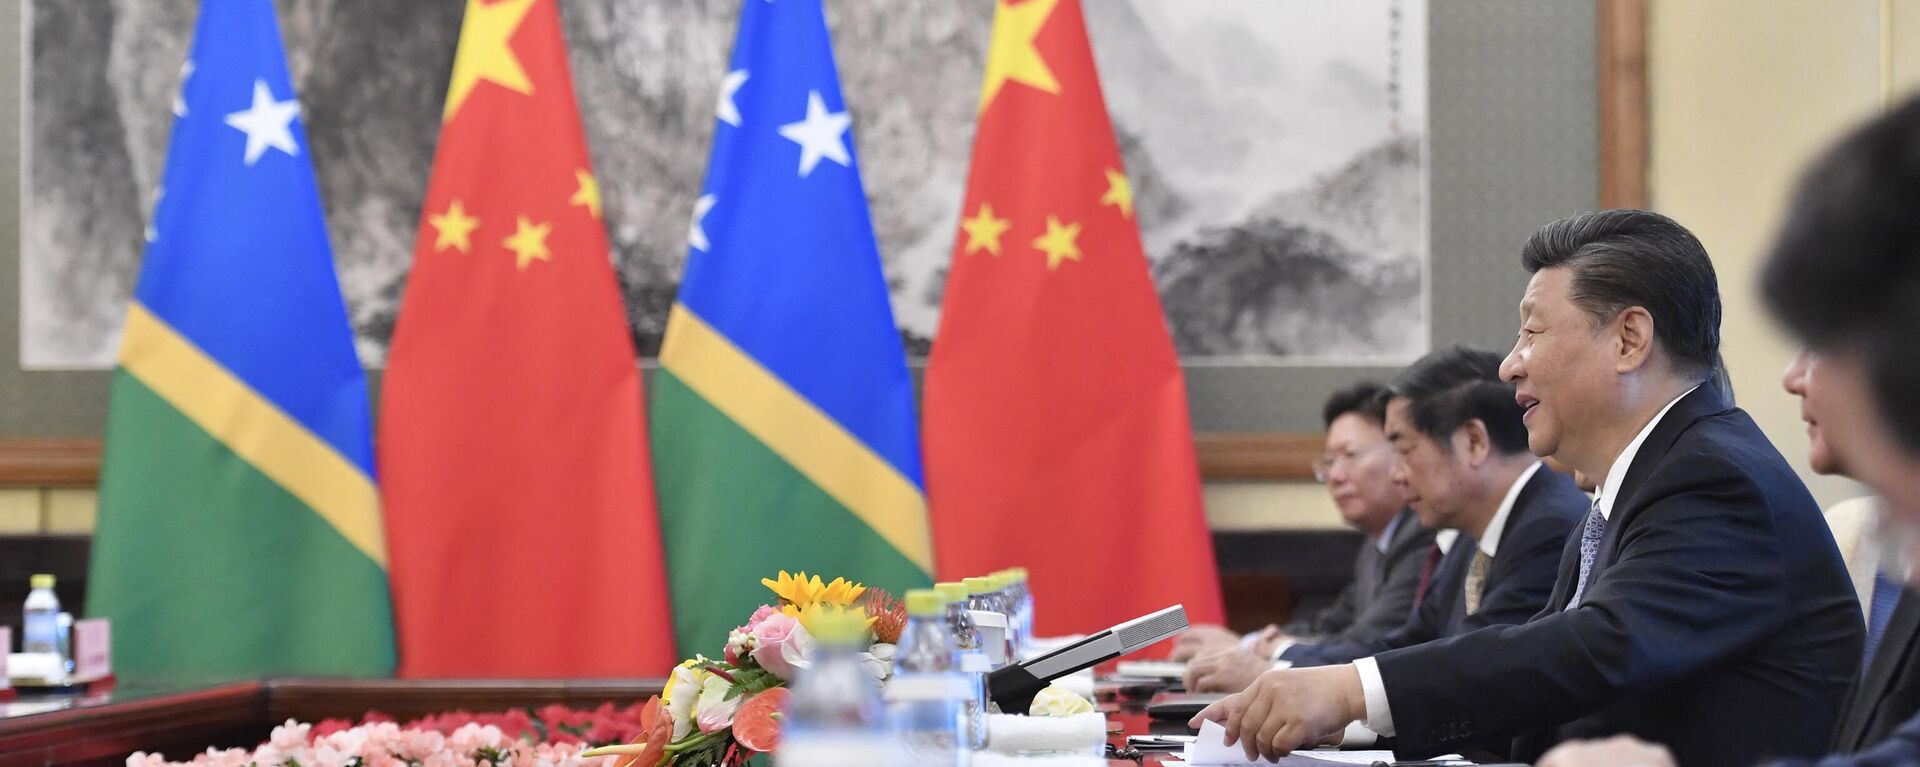 Chinese President Xi Jinping talks to Solomon Islands Prime Minister Manasseh Sogavare (not pictured) during their meeting at the Diaoyutai State Guesthouse in Beijing on October 9, 2019. (Photo by Parker Song / POOL / AFP) - Sputnik International, 1920, 19.04.2022